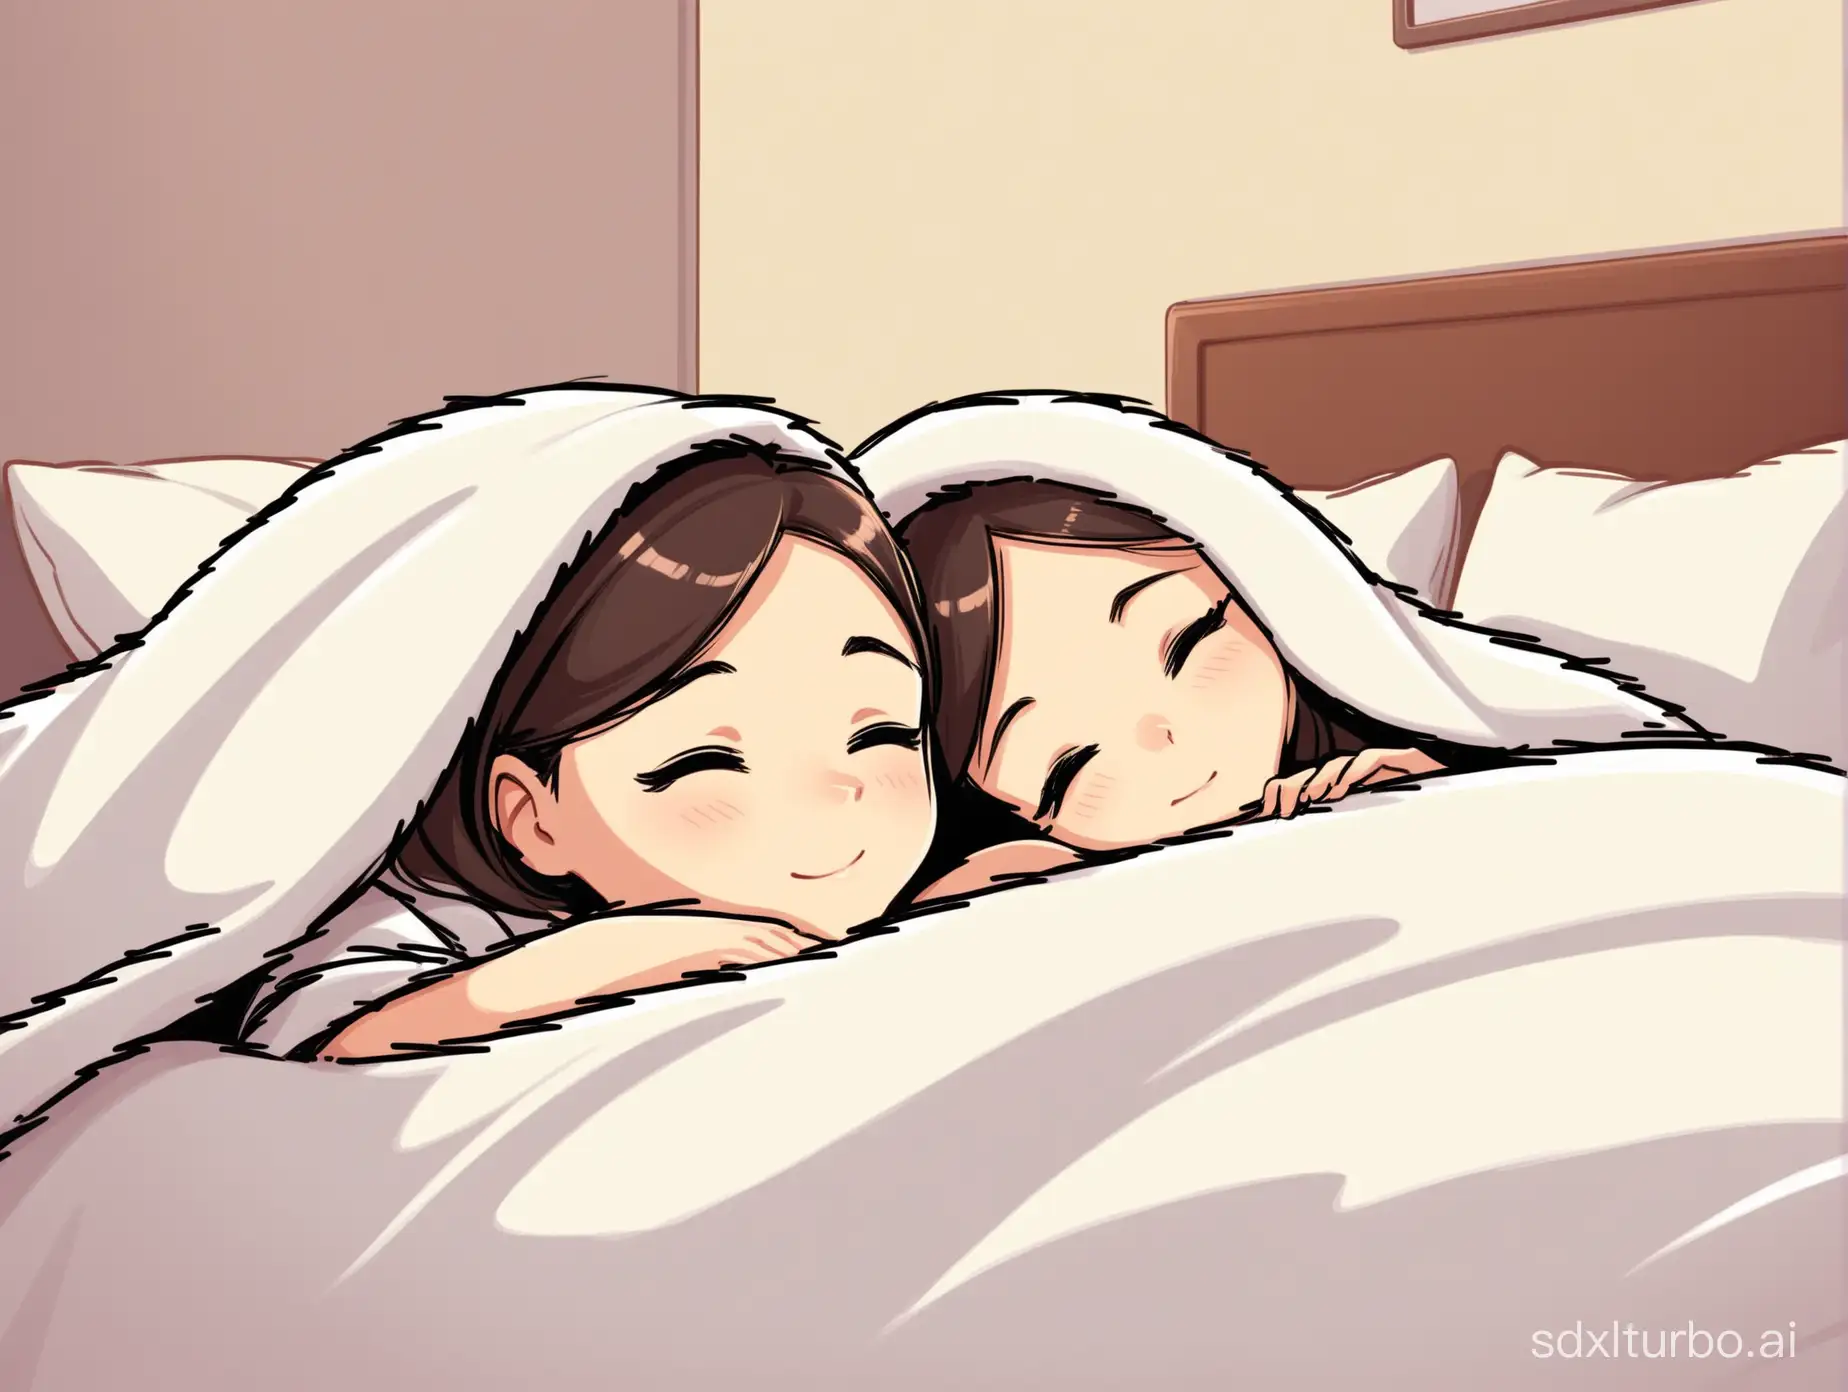 Cartoon picture, bedroom background, husband and wife lying on the bed, covered with a blanket, heads resting on pillows.